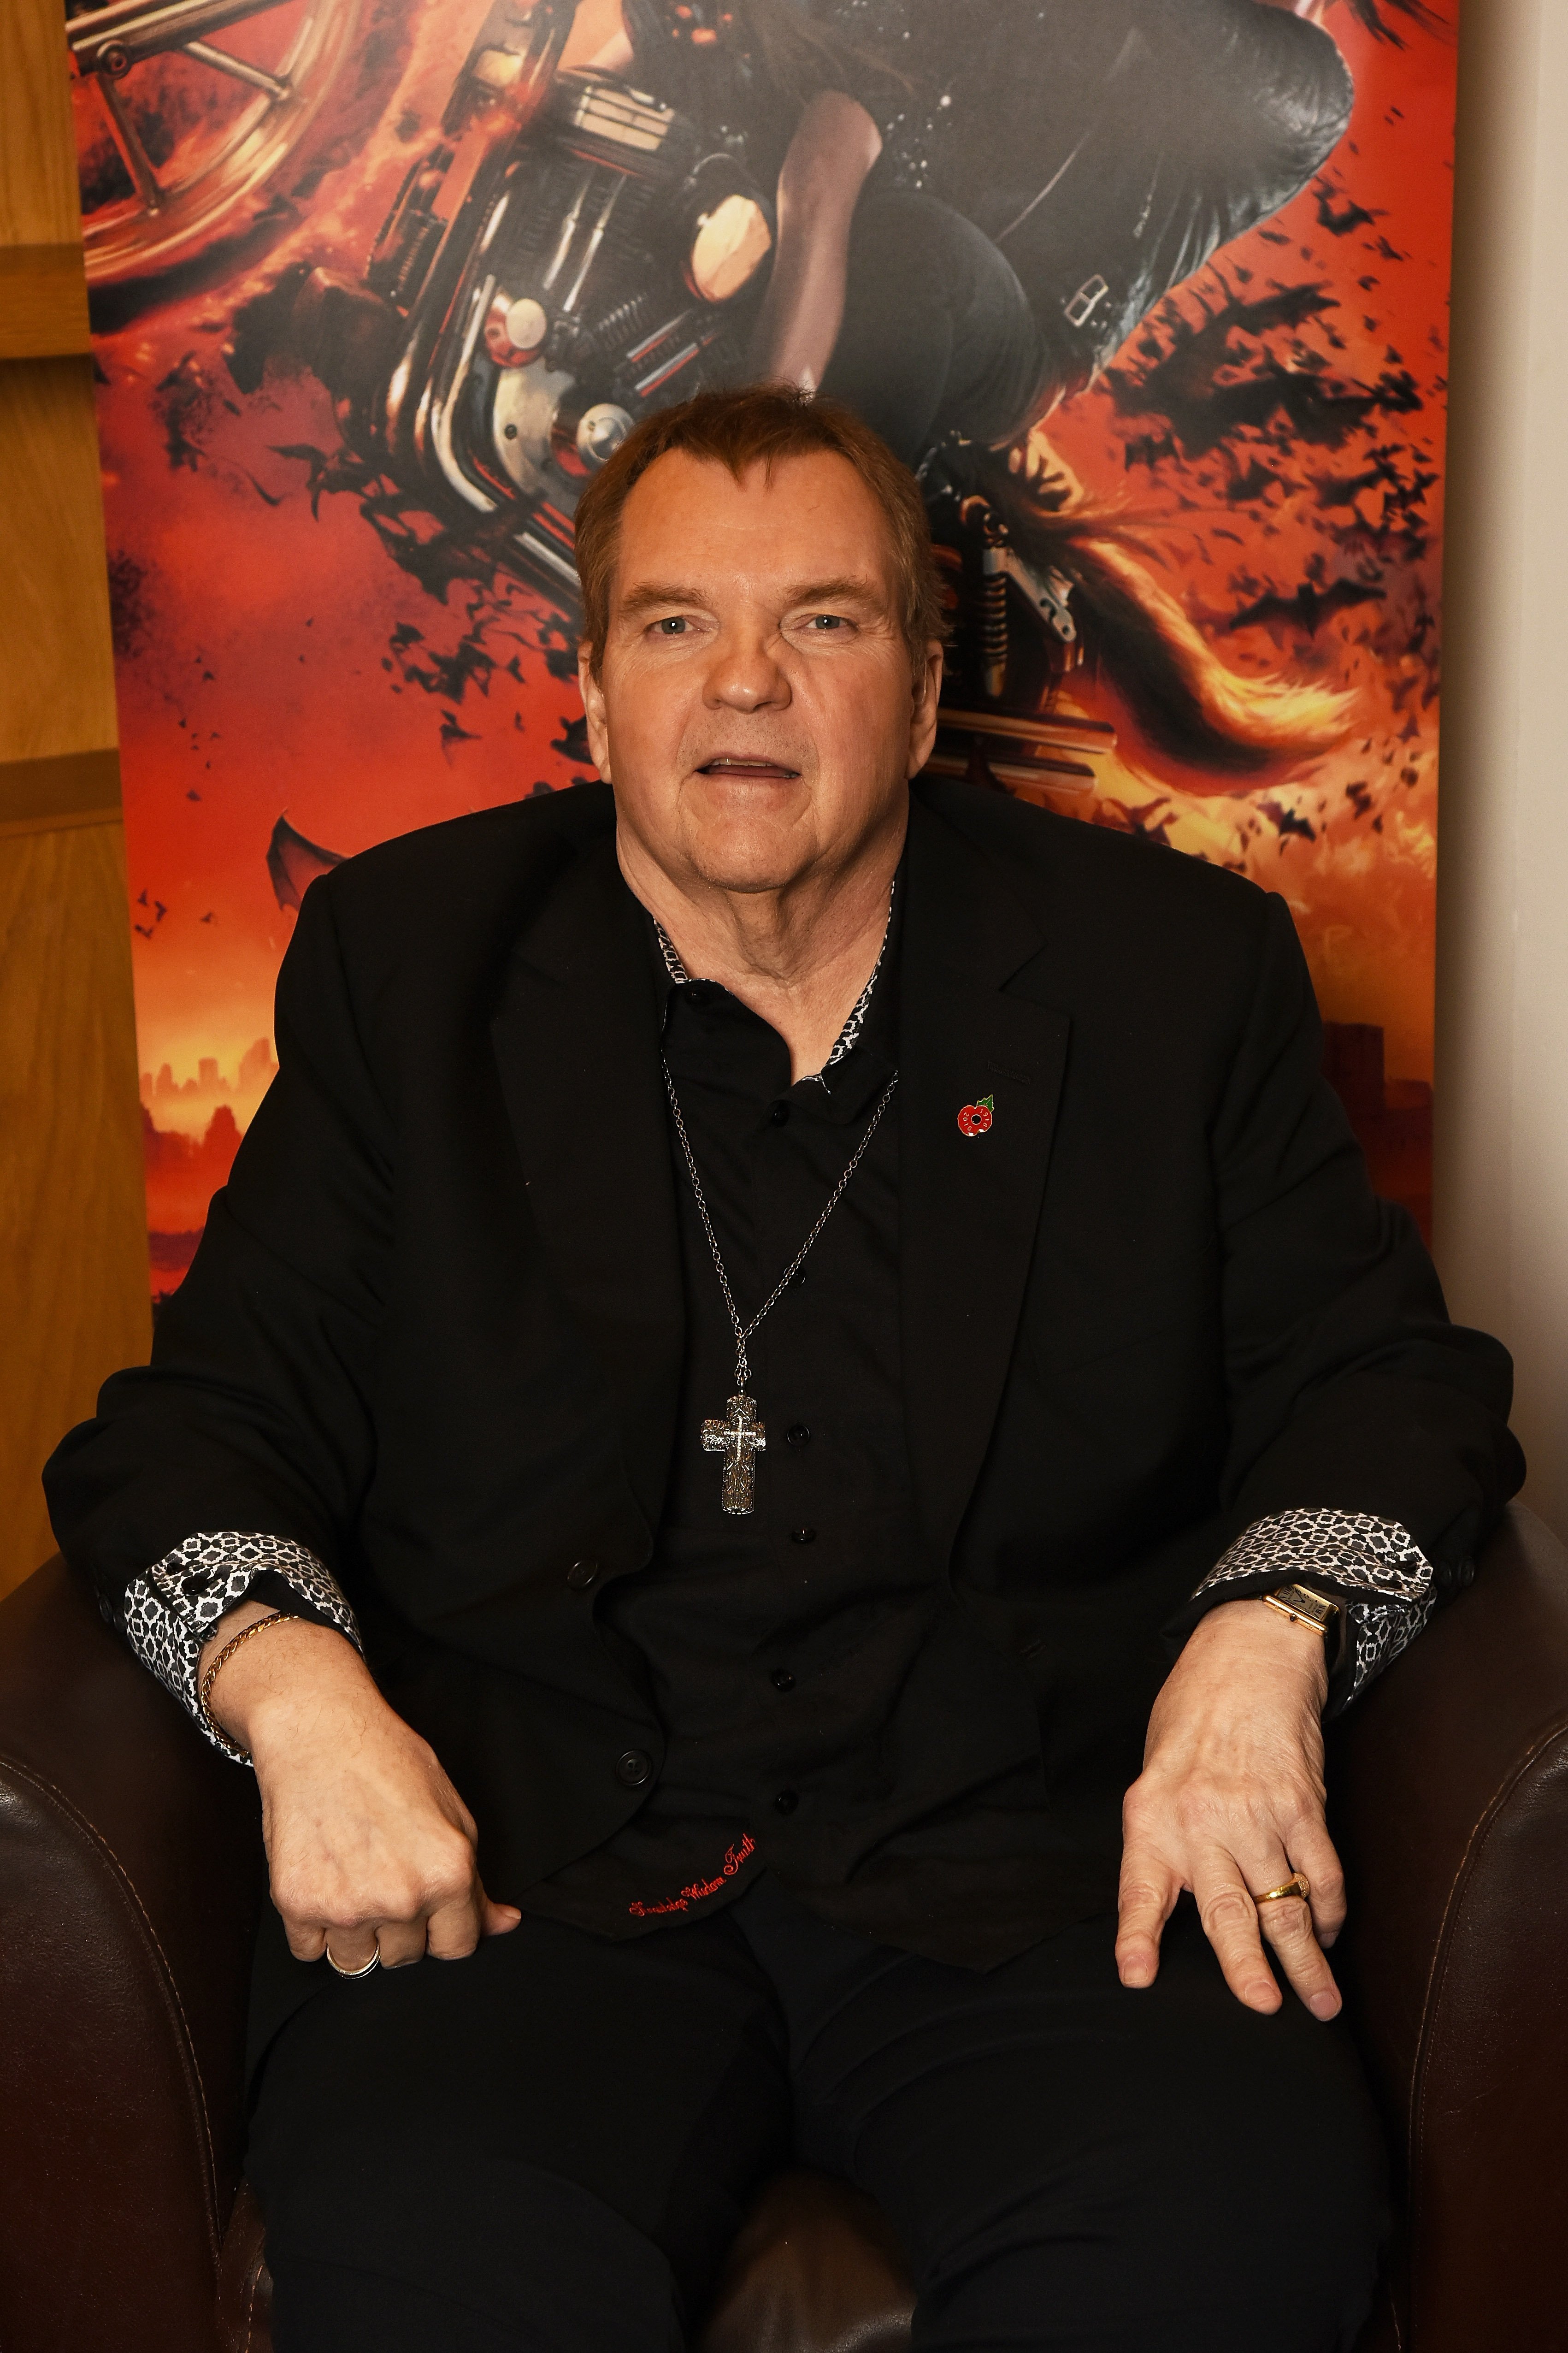 Meat Loaf poses for a portrait at the launch for Jim Steinman's 'Bat Out of Hell The Musical' at the London Coliseum on St Martin's Lane on November 3, 2016, in London, England. | Source: Getty Images.